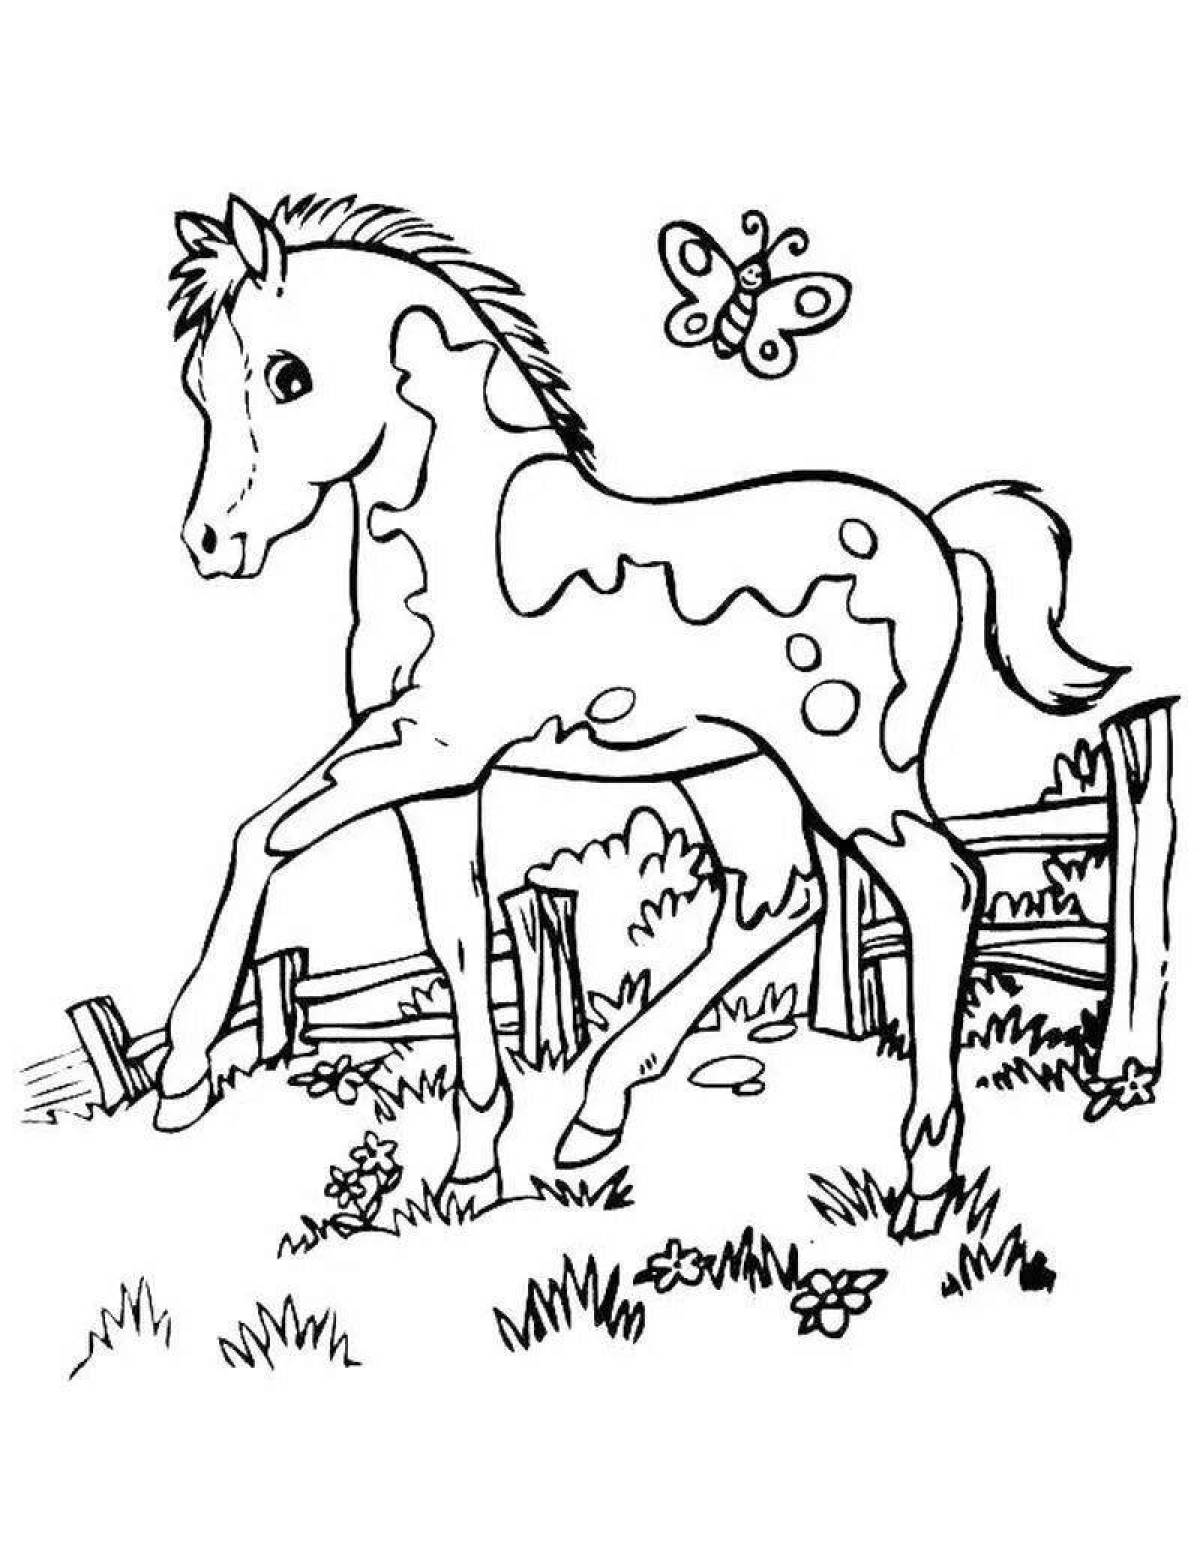 Amazing animal coloring pages for 10-12 year olds